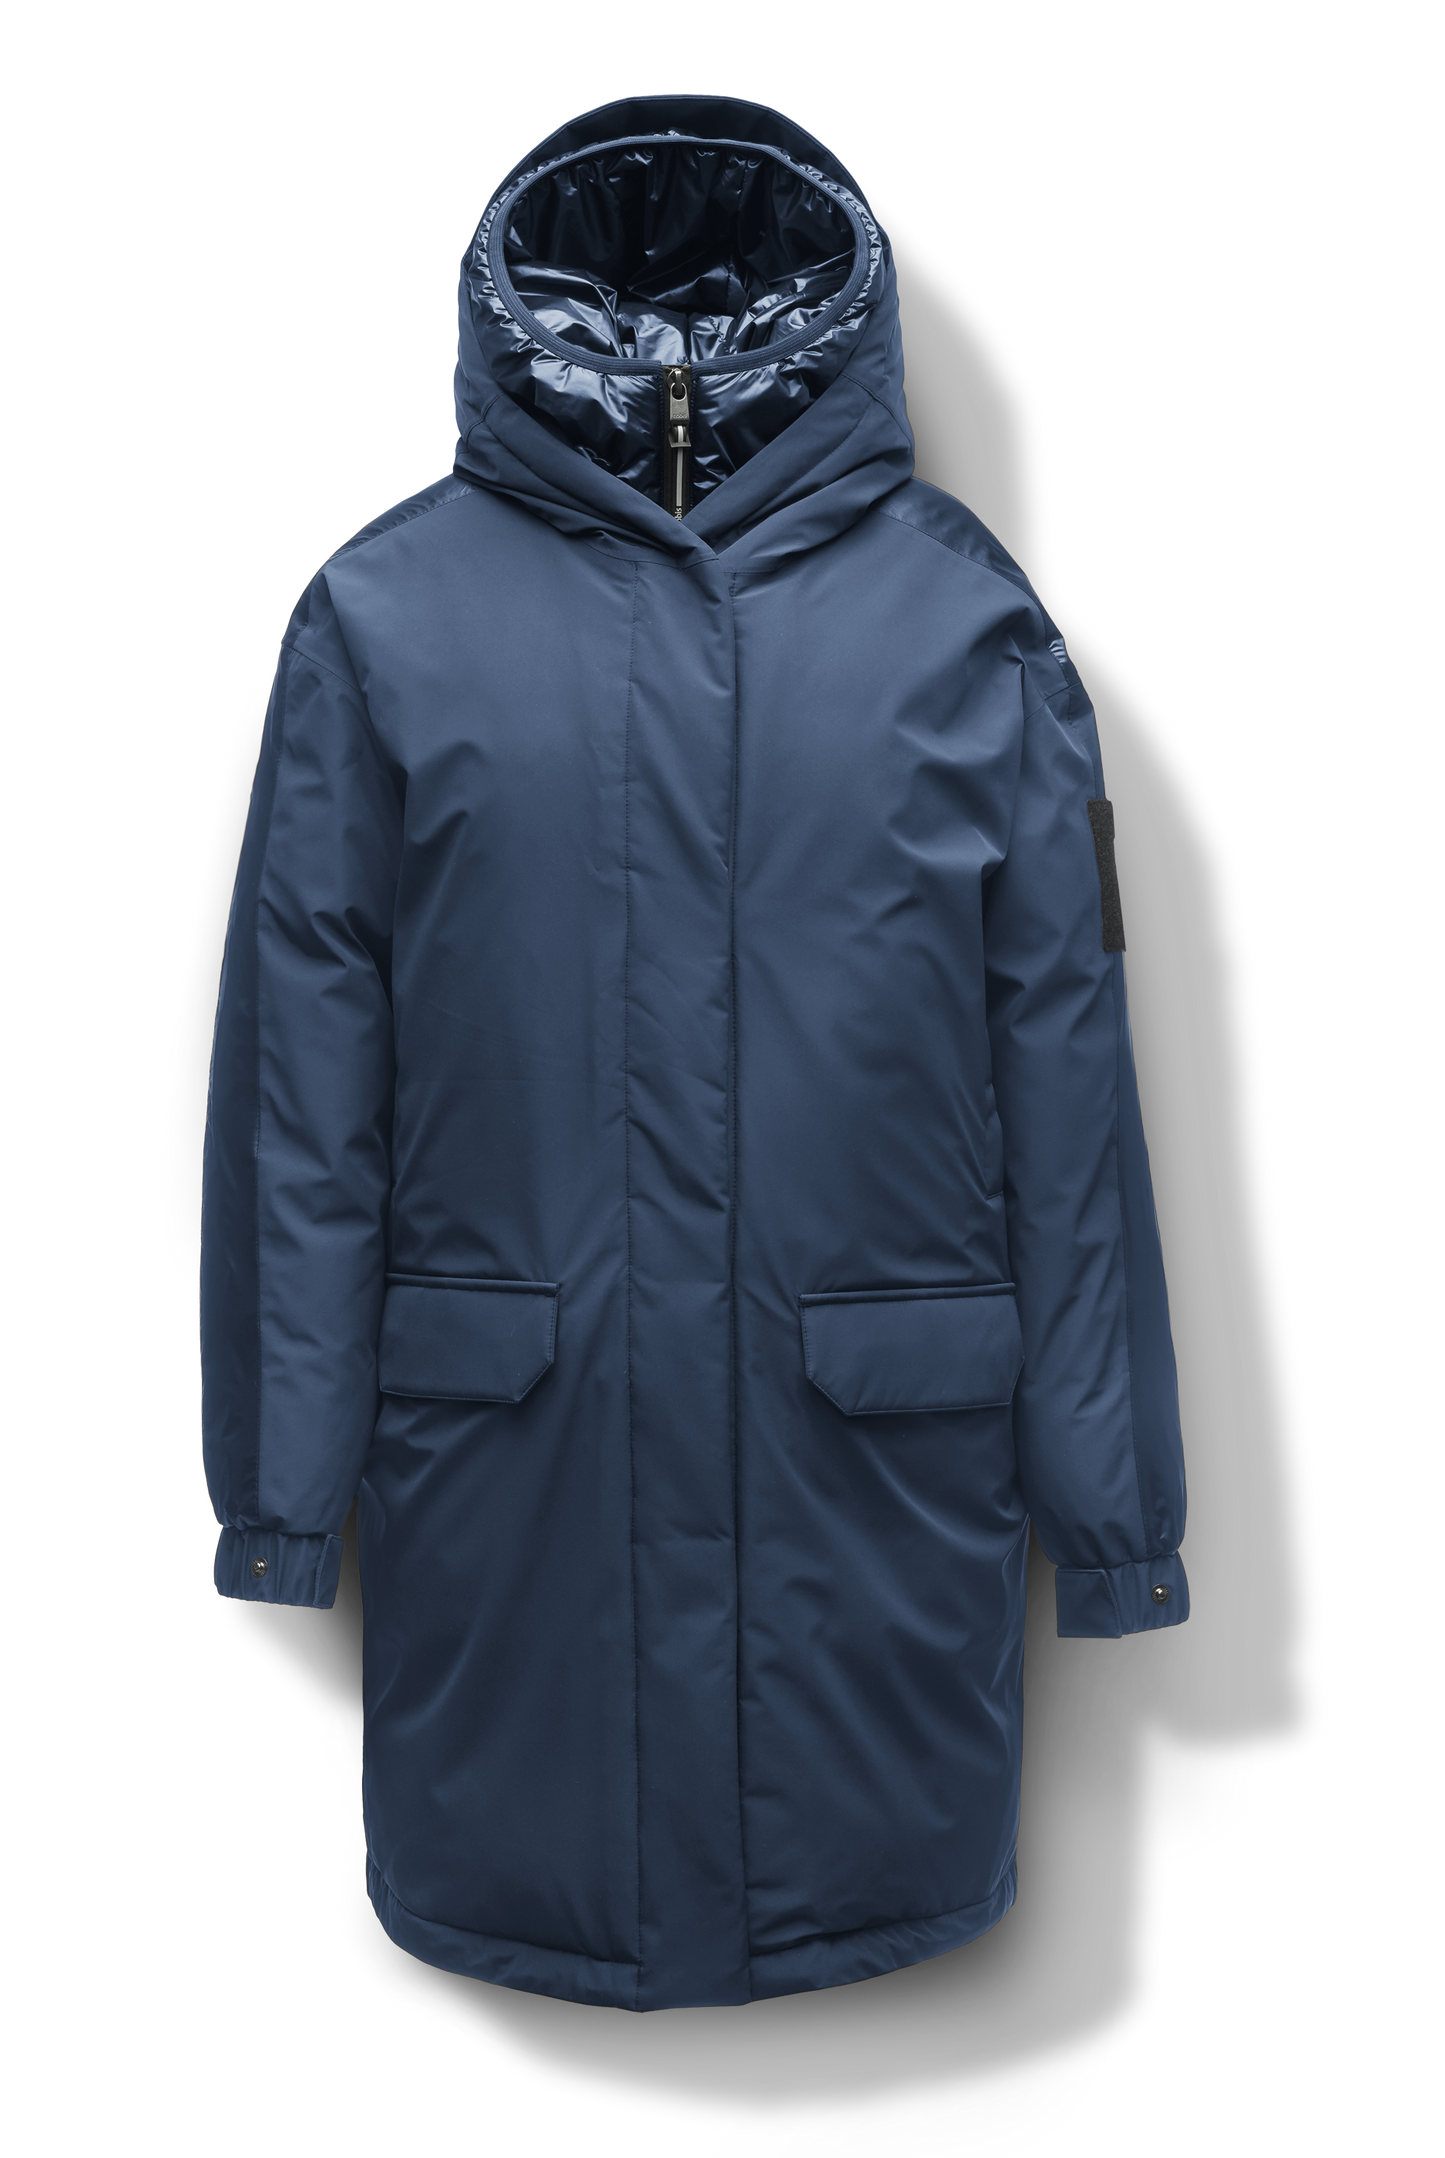 Slyn Women's Performance Parka in thigh length, premium 3-ply micro denier and cire technical nylon taffeta fabrication, Premium Canadian origin White Duck Down insulation, non-removable down-filled hood, inner hooded gilet, two-way centre-front zipper with magnetic closure wind flap, fleece-lined pockets at chest and waist, pit zipper vents, in Marine